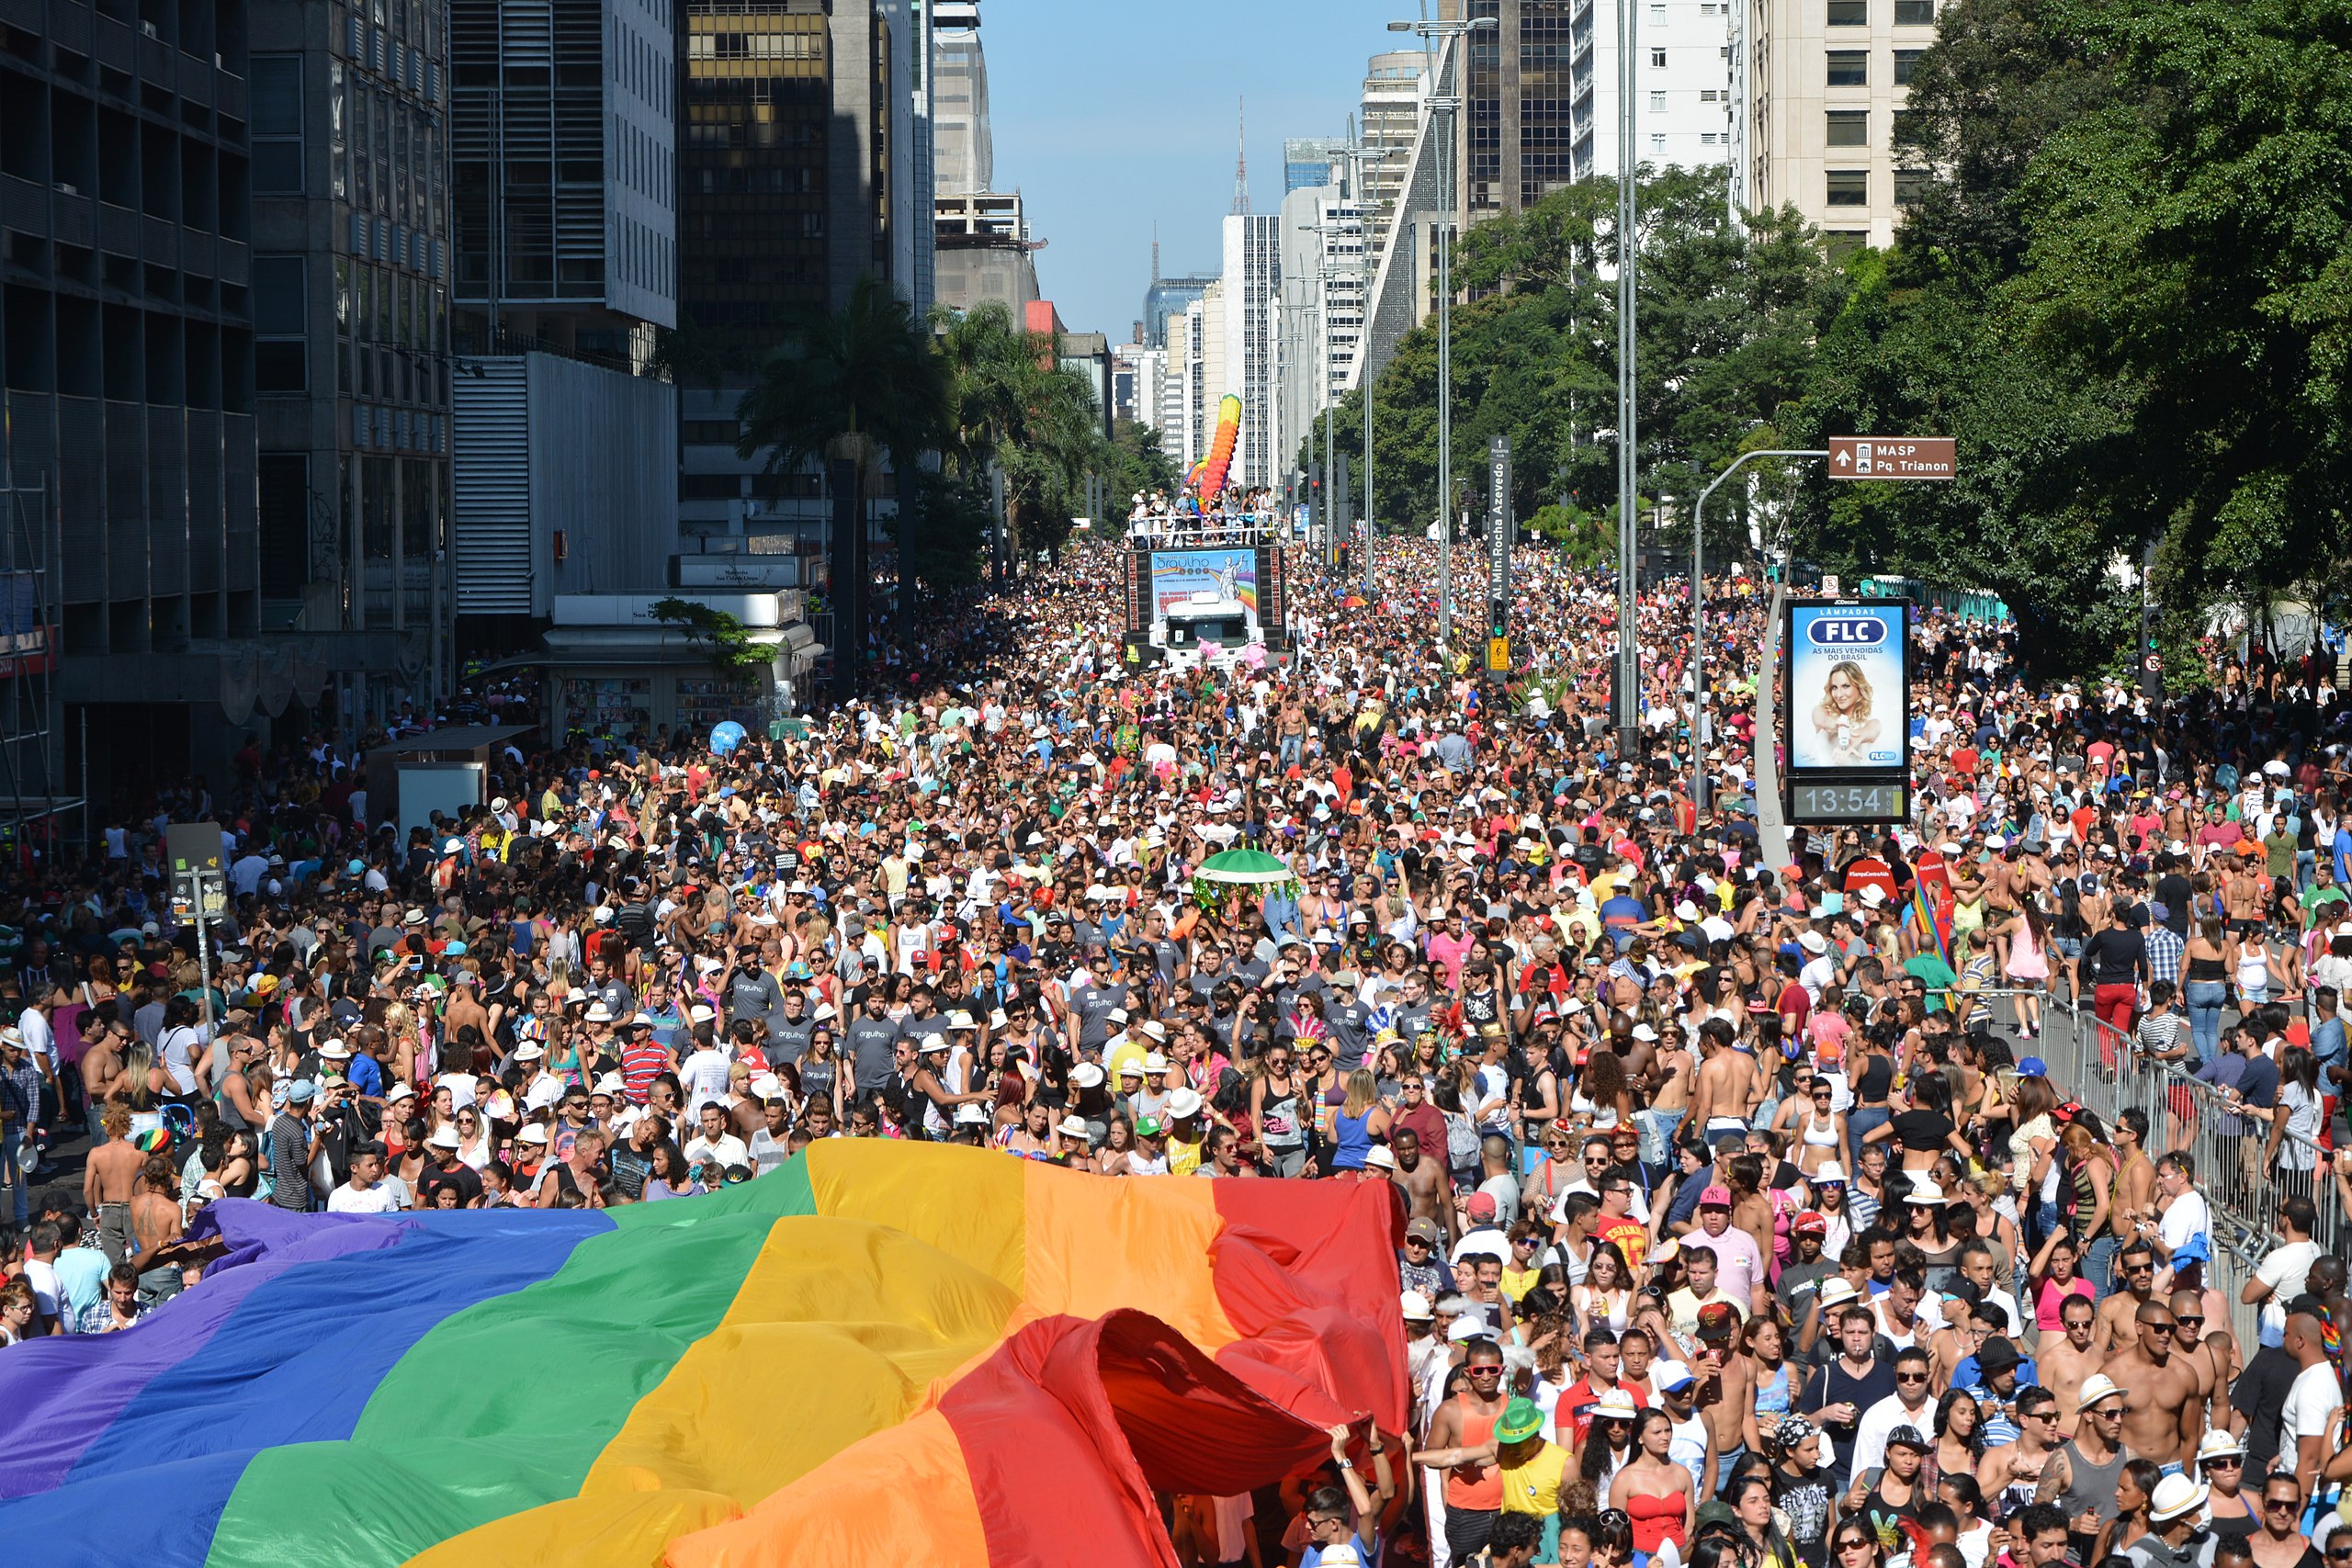 An incredible scene of thousands of people marching with a very large rainbow flag among them.